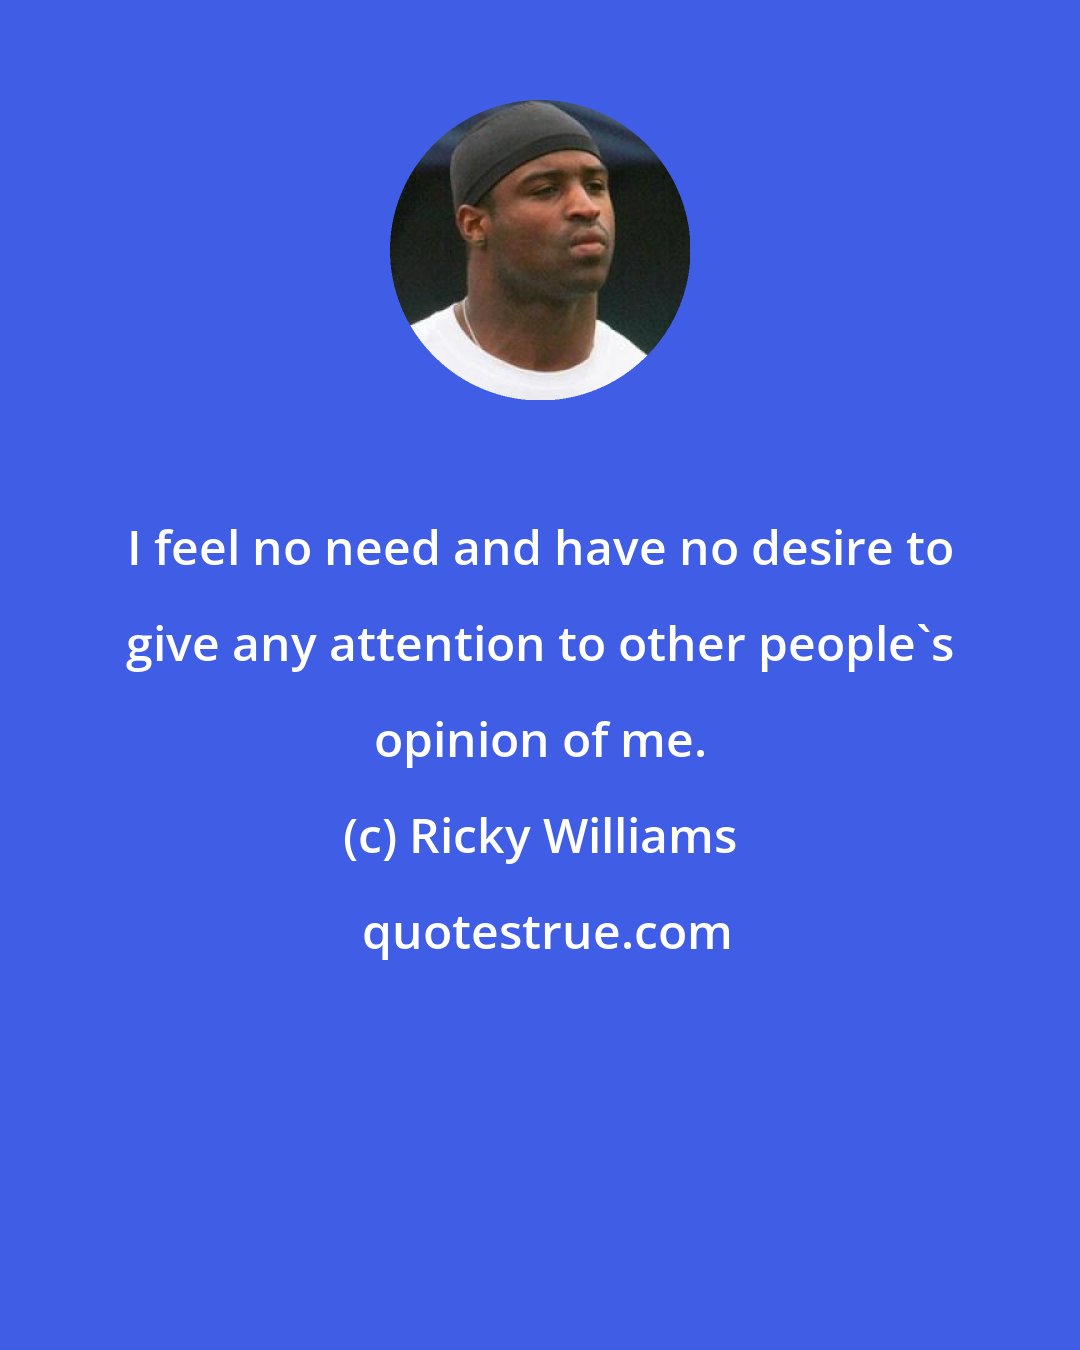 Ricky Williams: I feel no need and have no desire to give any attention to other people's opinion of me.